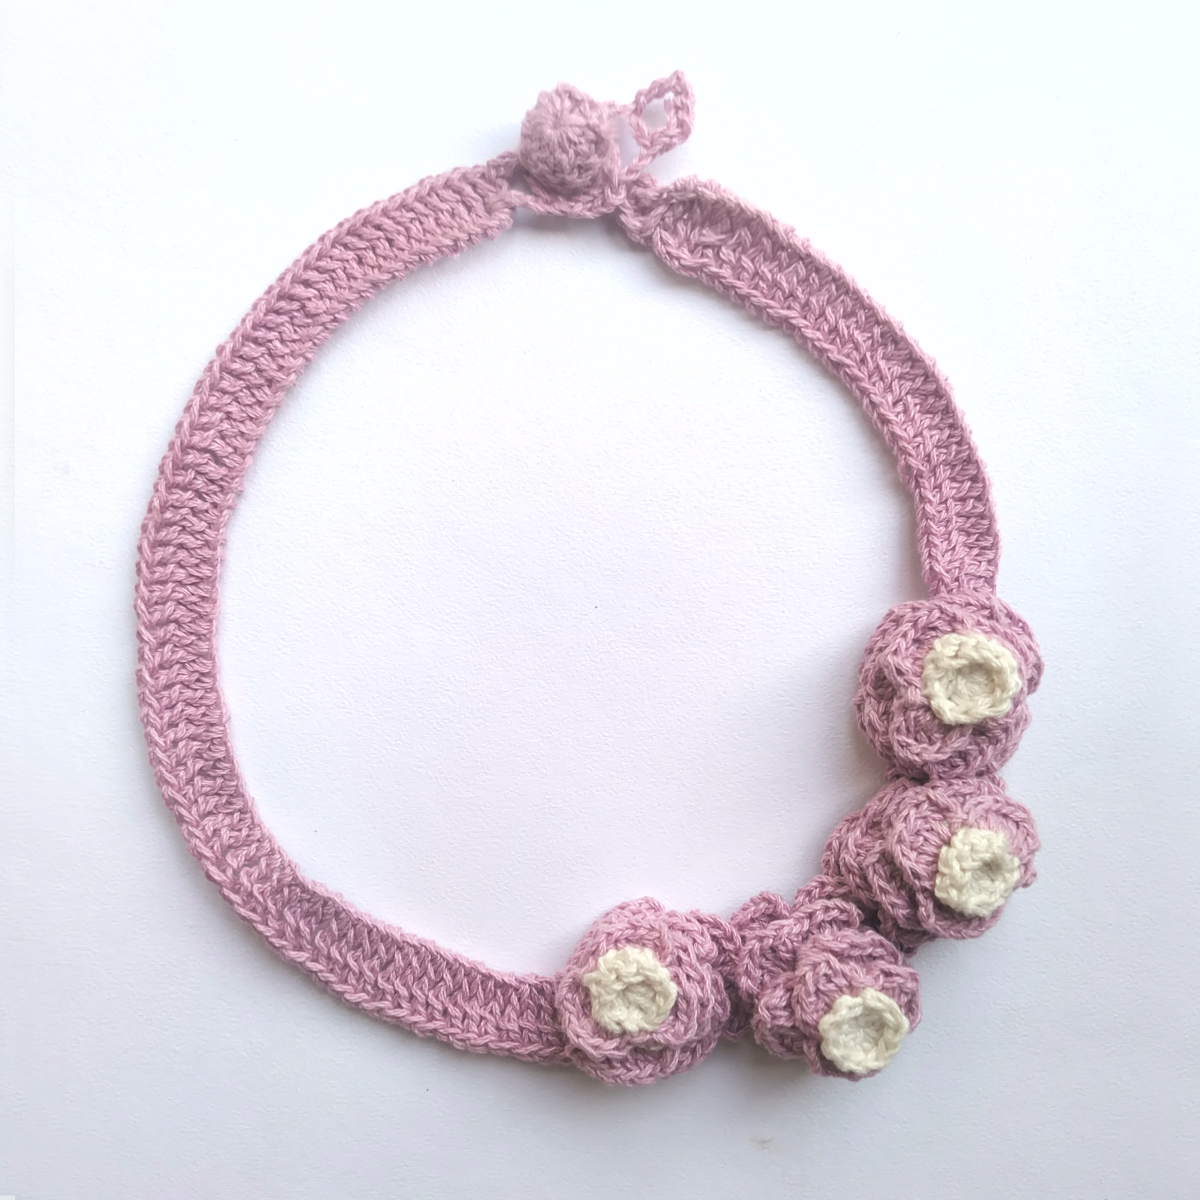 Rose Handcrafted Crochet Necklace